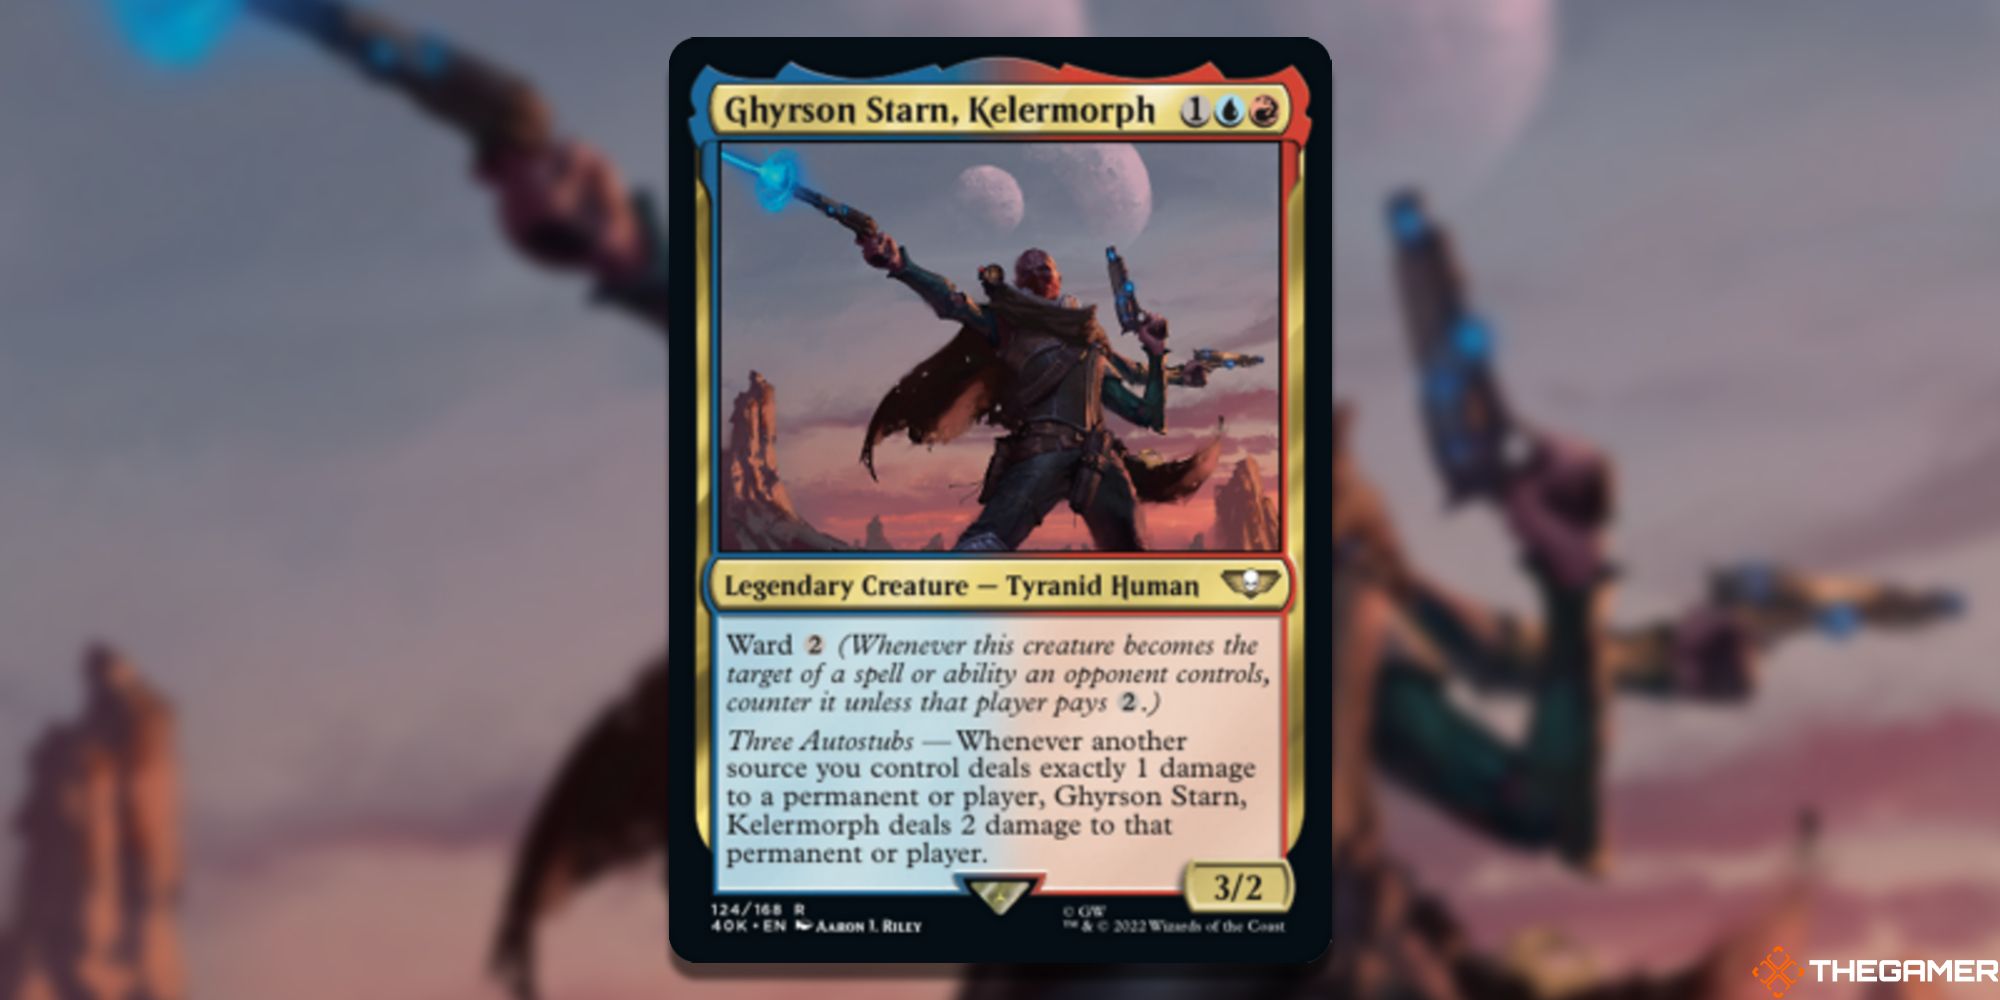 Image of the Ghyrson Starn Kelermorph card in Magic: The Gathering, with art by Aaron J. Riley